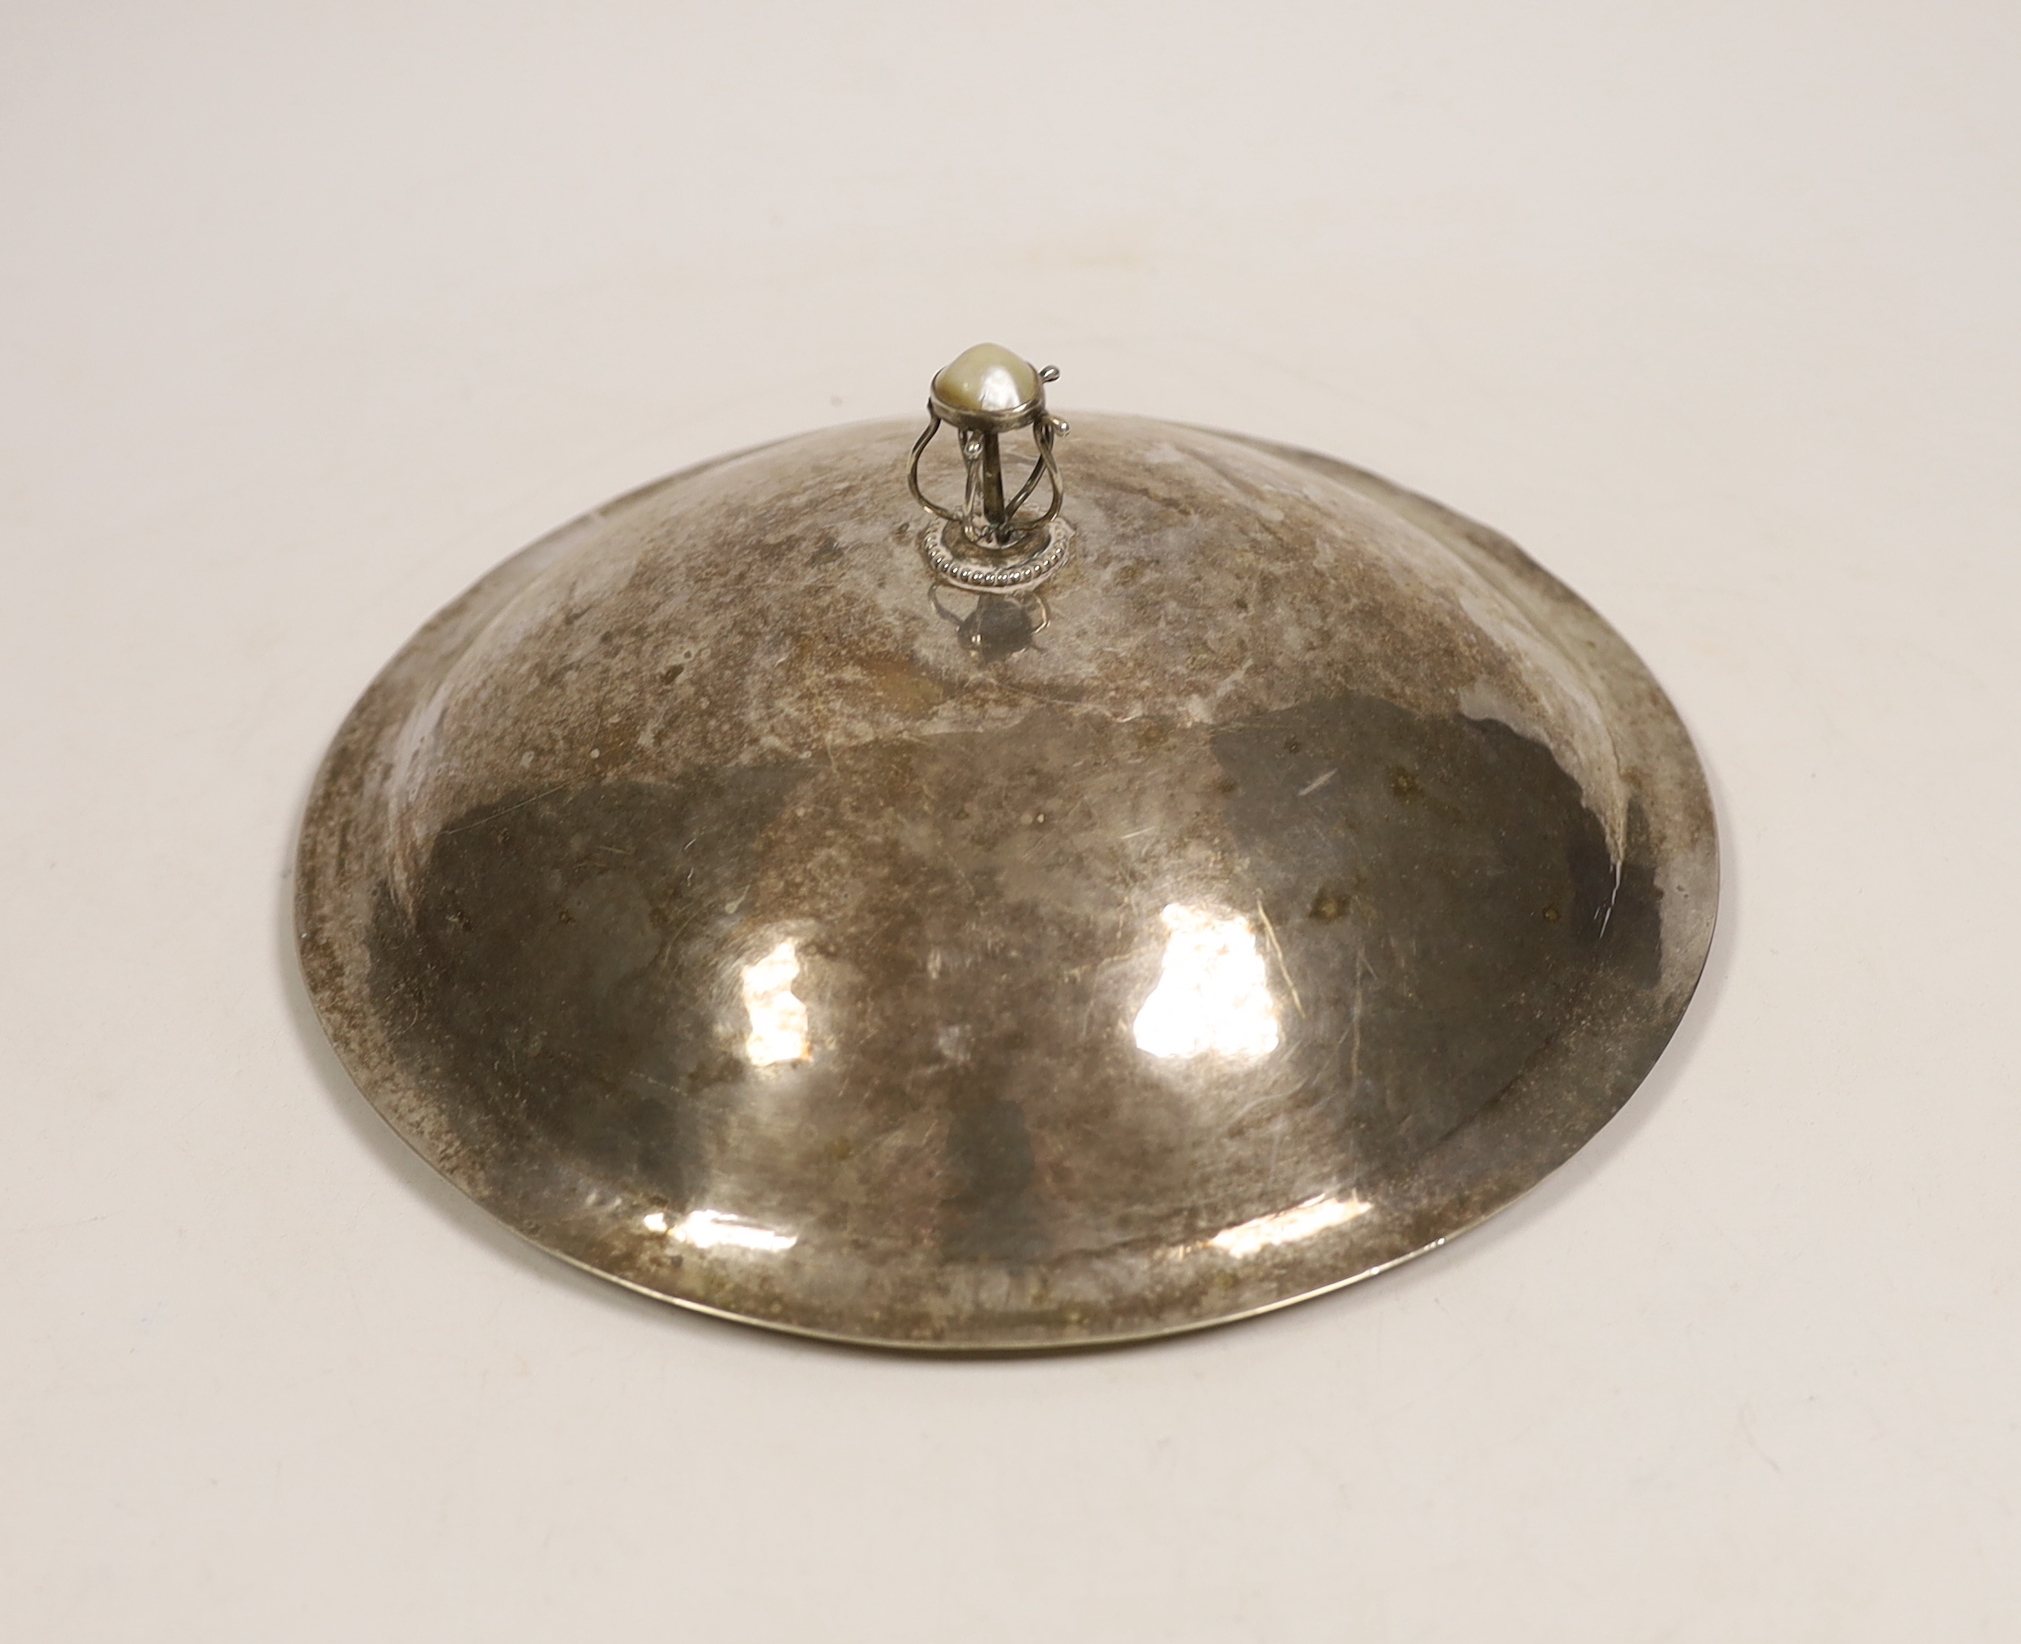 A Charles Robert Ashbee, Guild of Handicraft late Victorian hammered silver muffin dish cover,